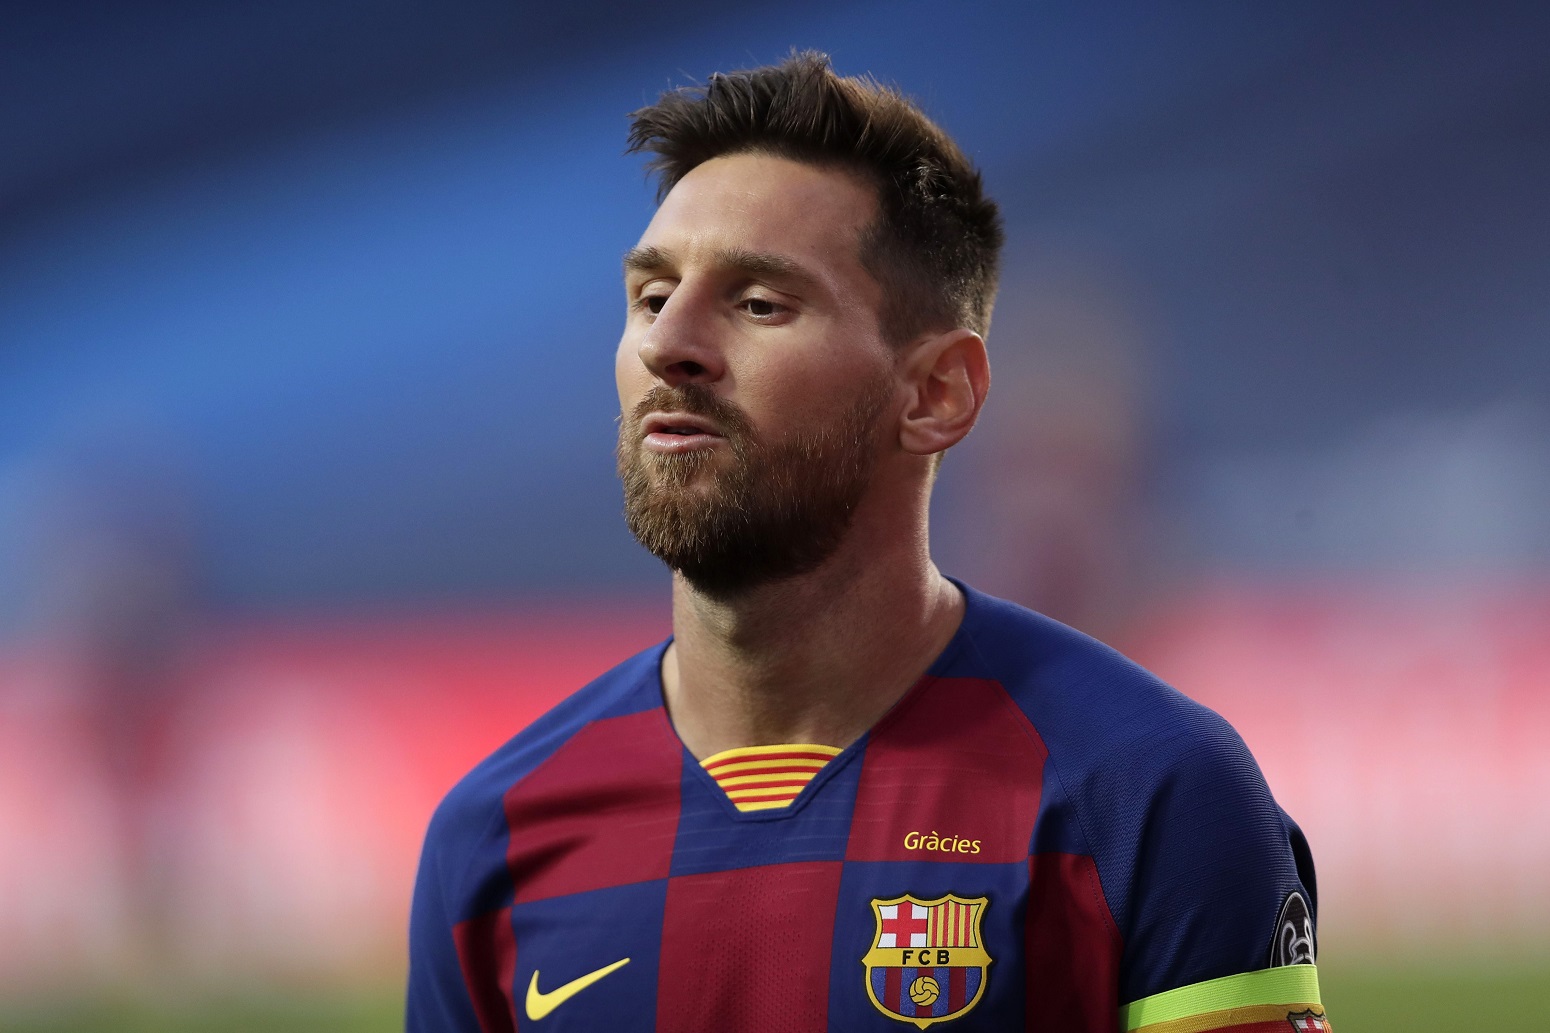 Lionel Messi Just Changed the Course of His Career